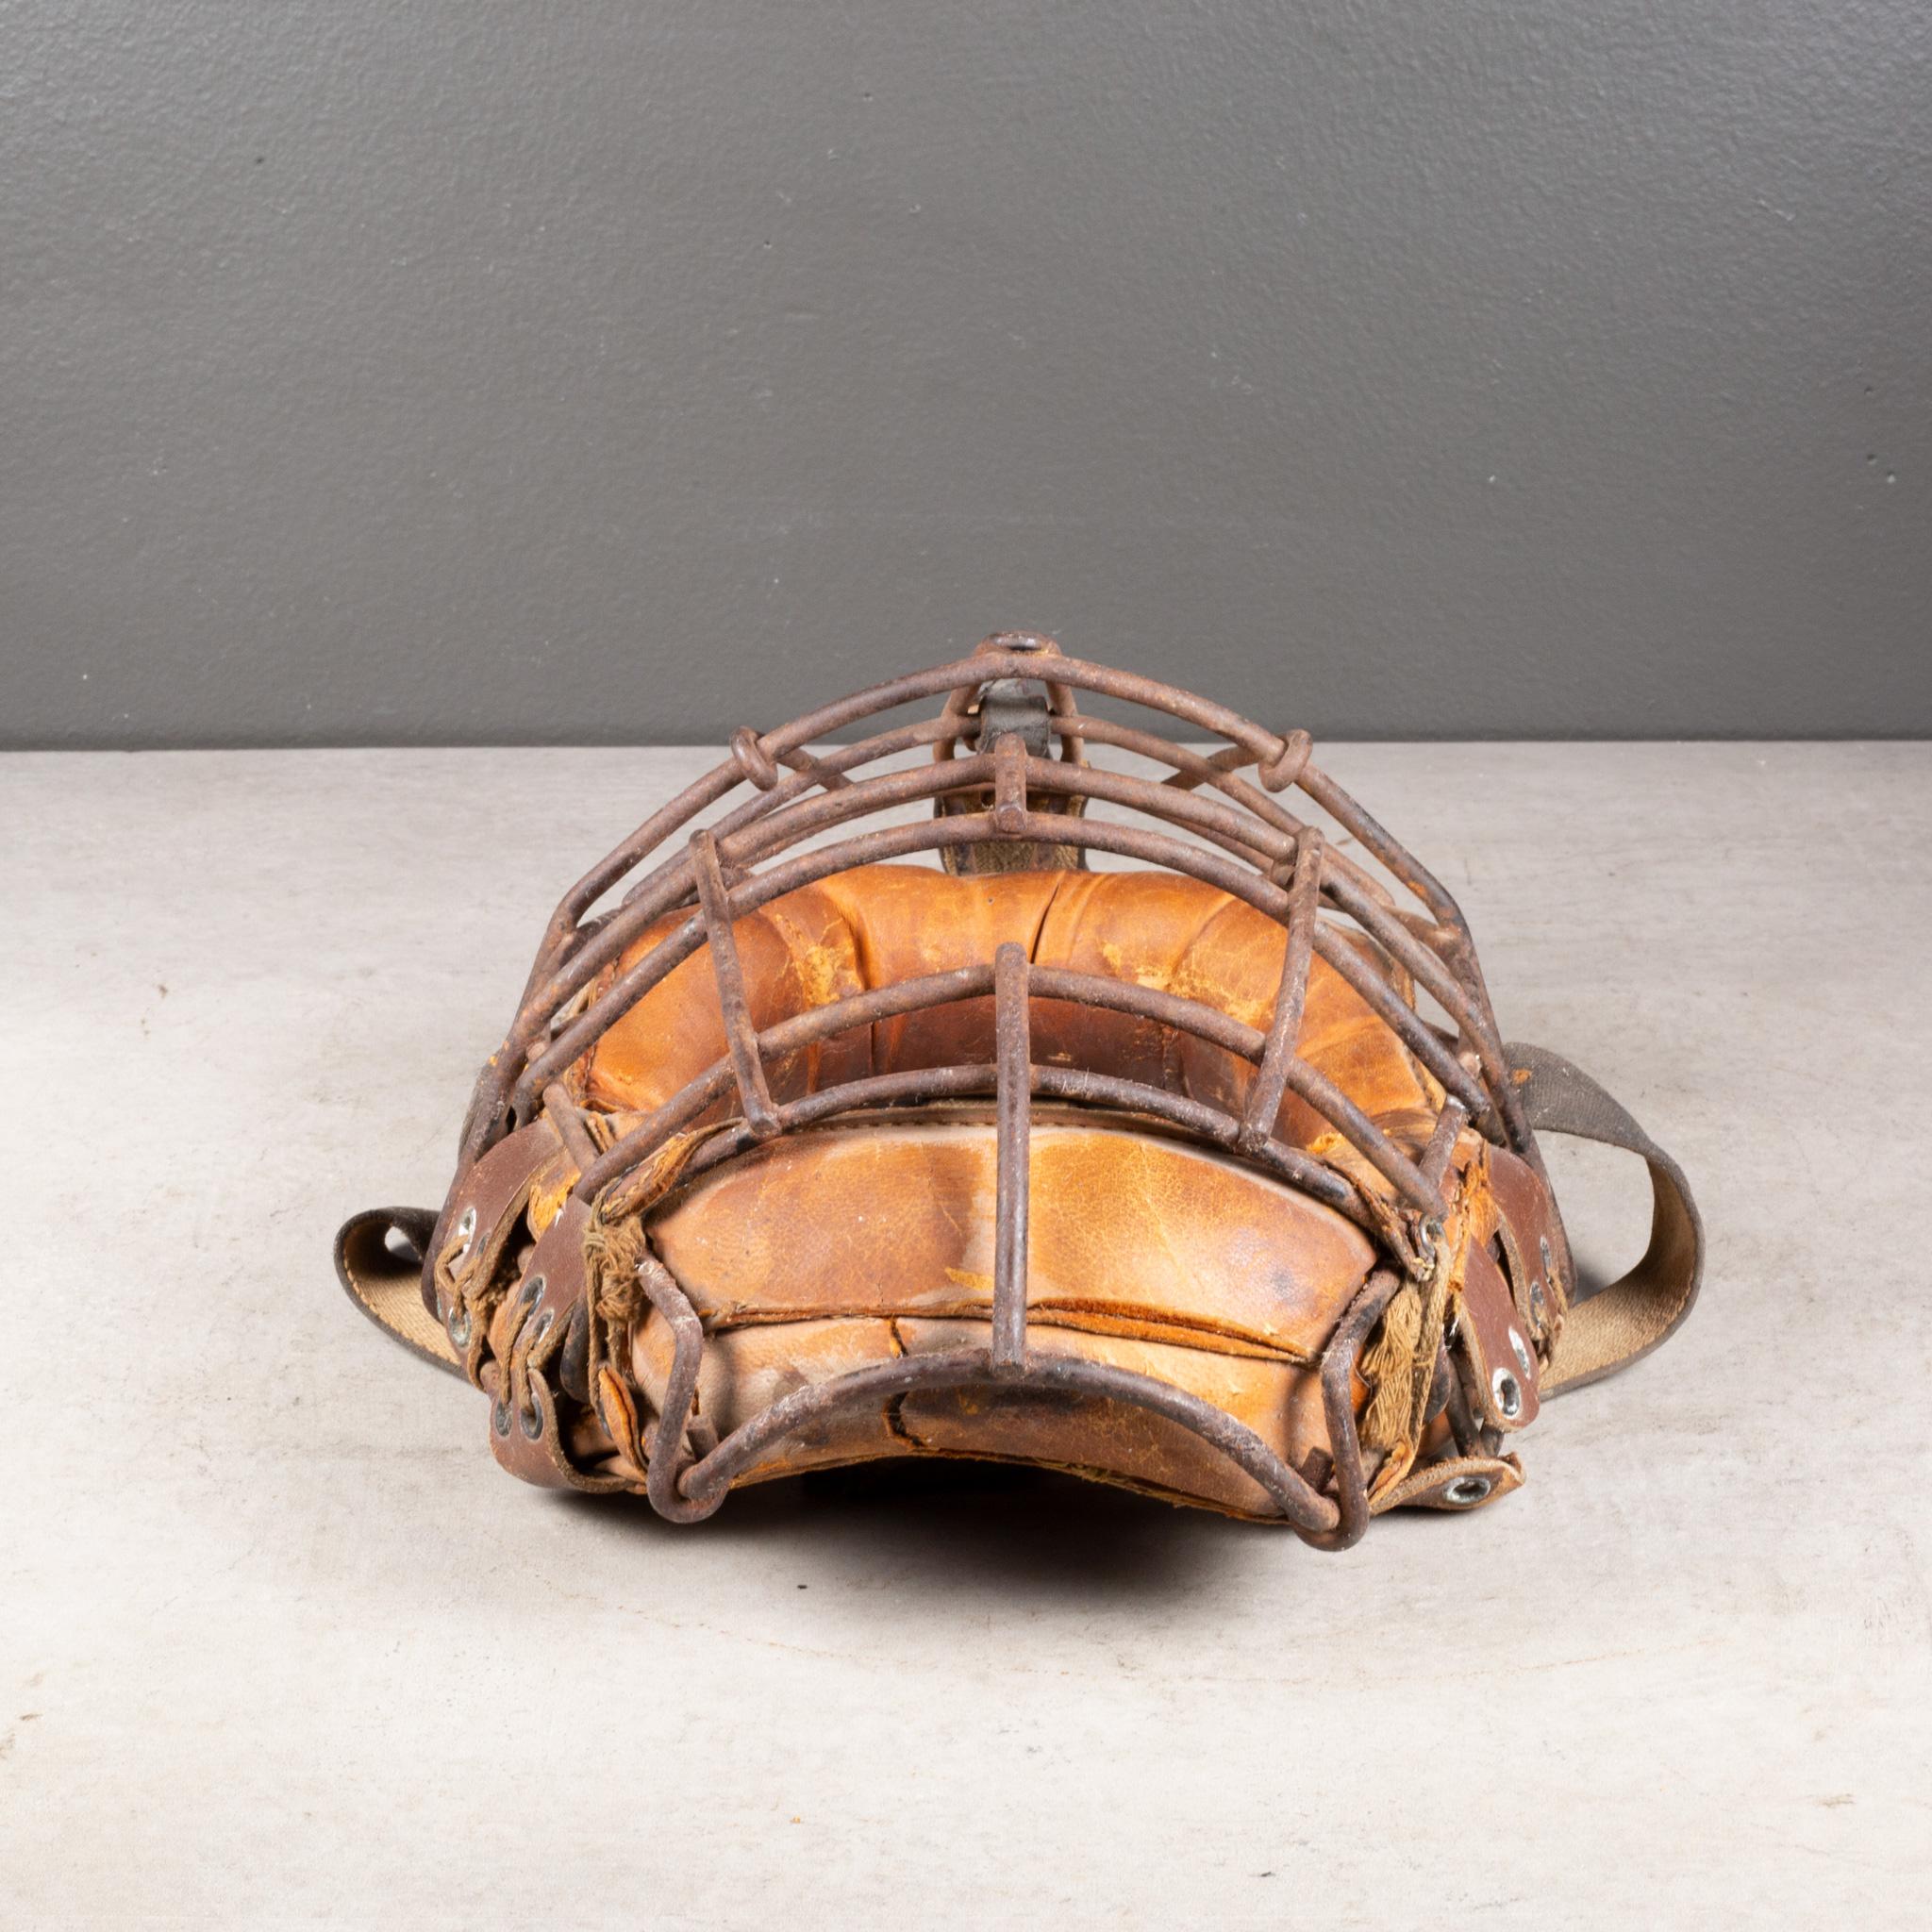 American Vintage Wilson Catcher's Mask, circa 1940 (FREE SHIPPING) For Sale